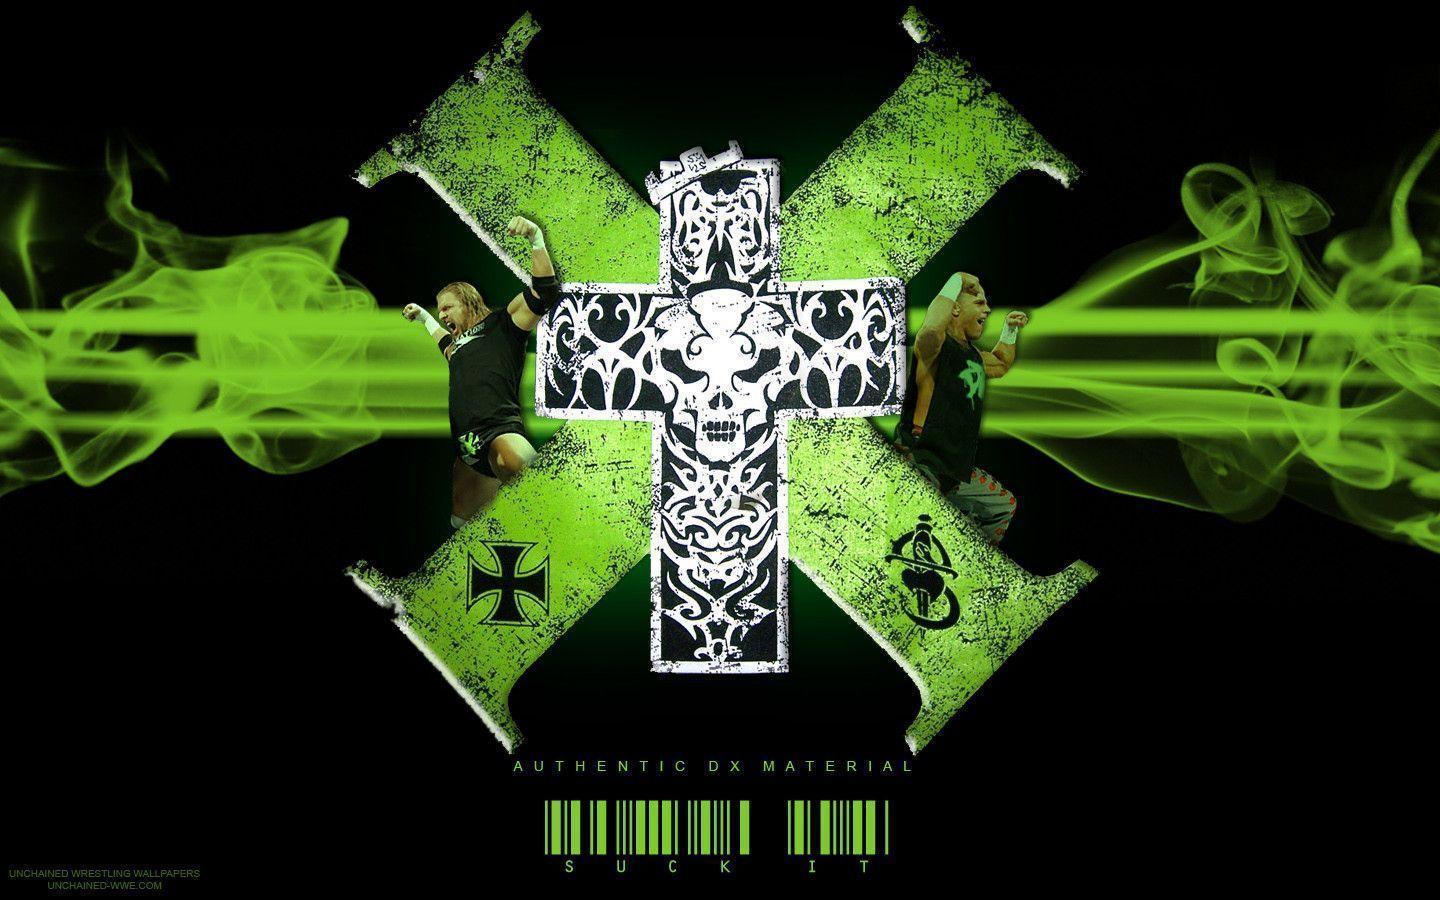 WWE Degeneration X "Authentic DX" Wallpaper Unchained WWE.com